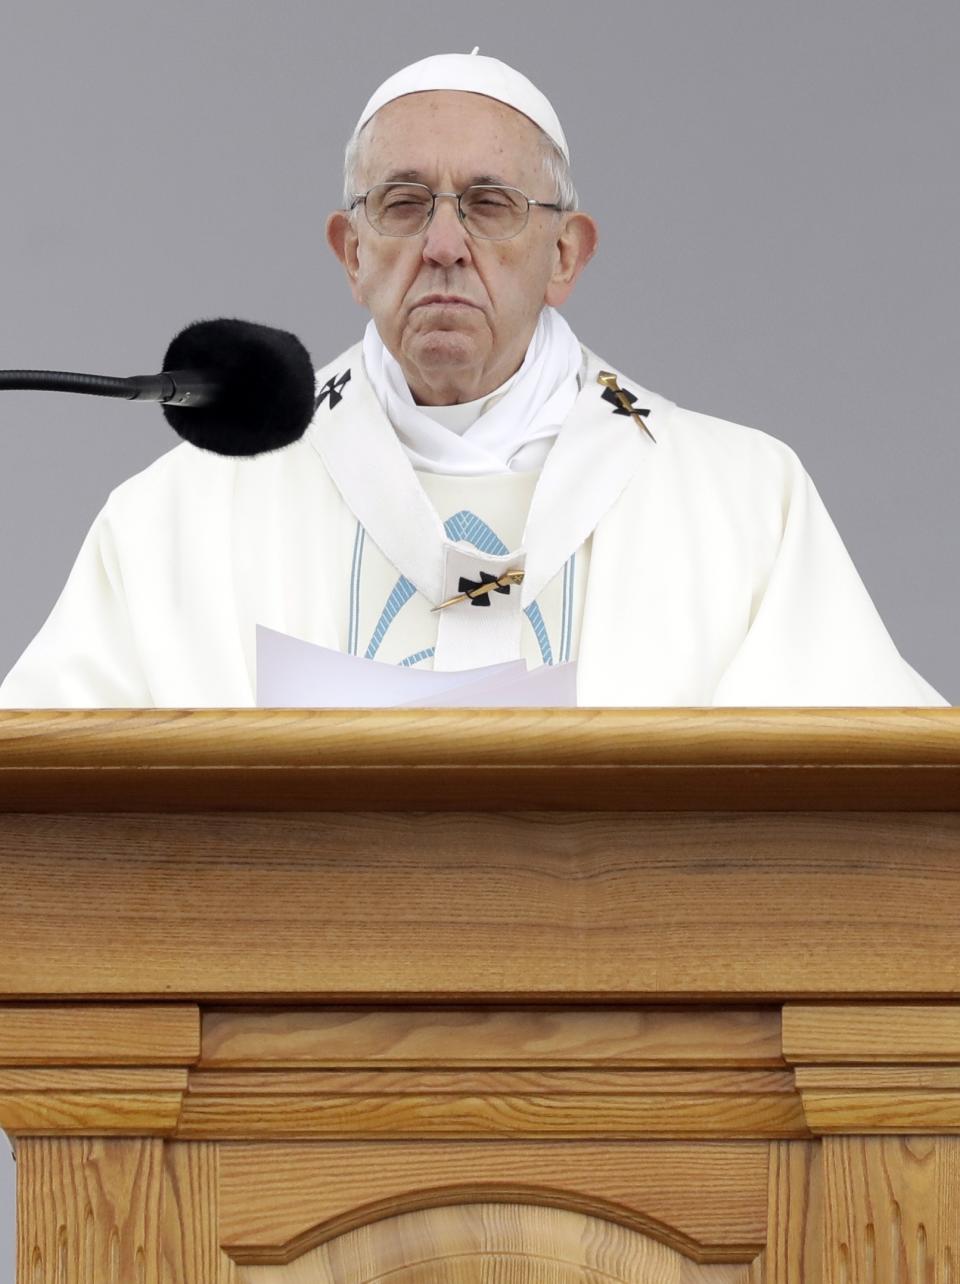 Pope Francis celebrates Mass in the area of the Shrine of the Mother of God, in Aglona, Latvia, Monday, Sept. 24, 2018. Pope Francis praised Latvians on Monday for resisting Soviet and Nazi occupation and persevering in their Christian faith, telling them: "You fought the good fight, you ran the race, you kept the faith." (AP Photo/Andrew Medichini)